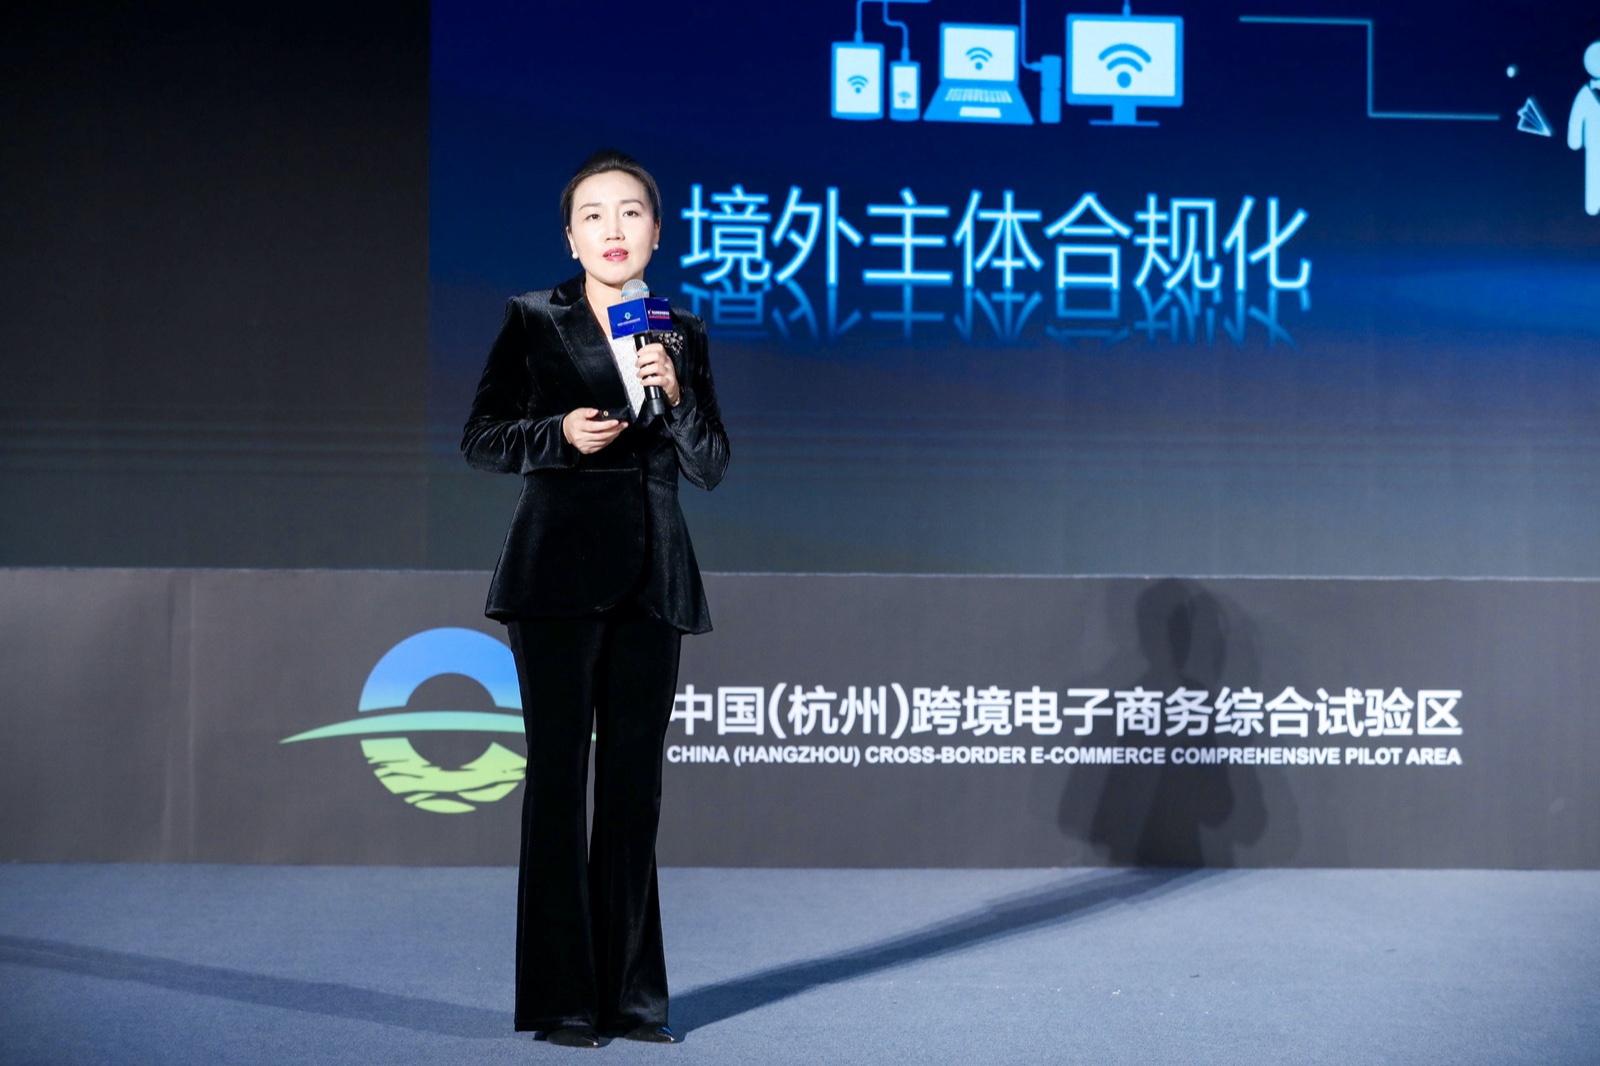 Wu Changhong: Innovation Development Mode Makes Hangzhou to be a “Bellwether” of the Development of Cross-border E-commerce